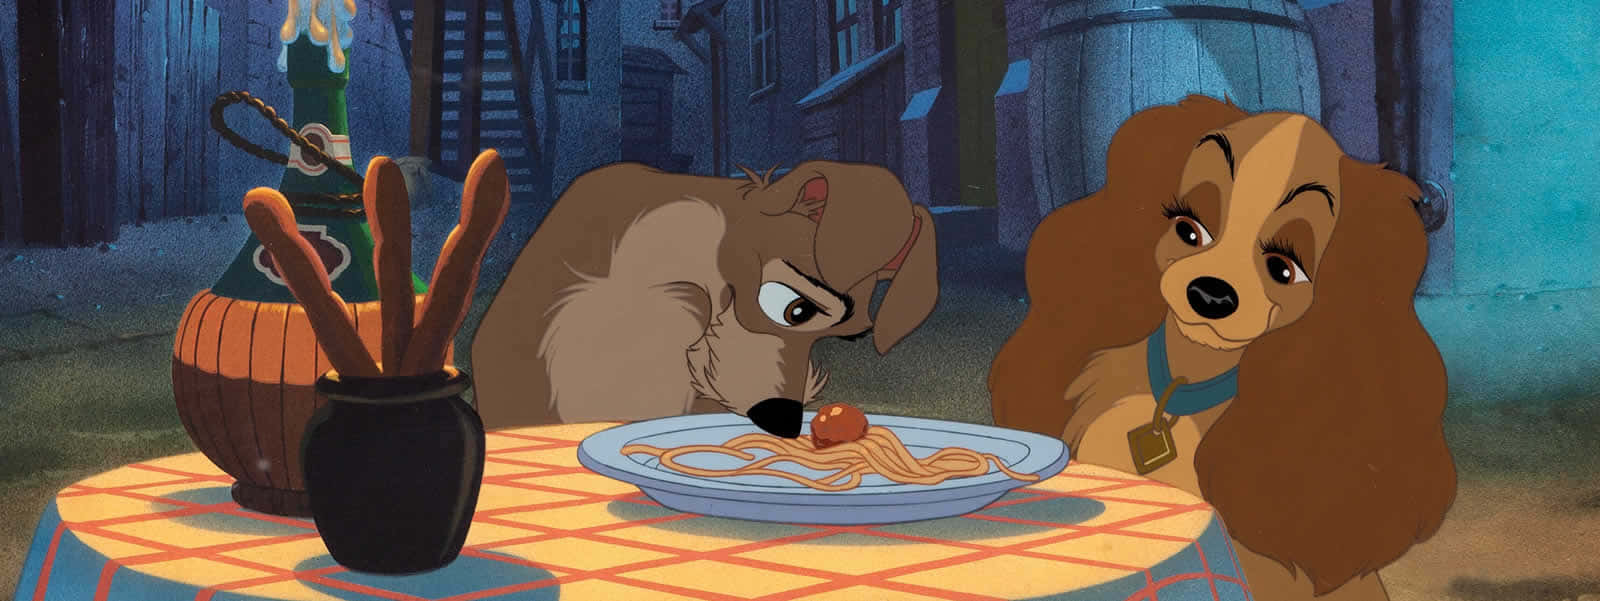 Lady and the Tramp sharing a romantic spaghetti dinner Wallpaper